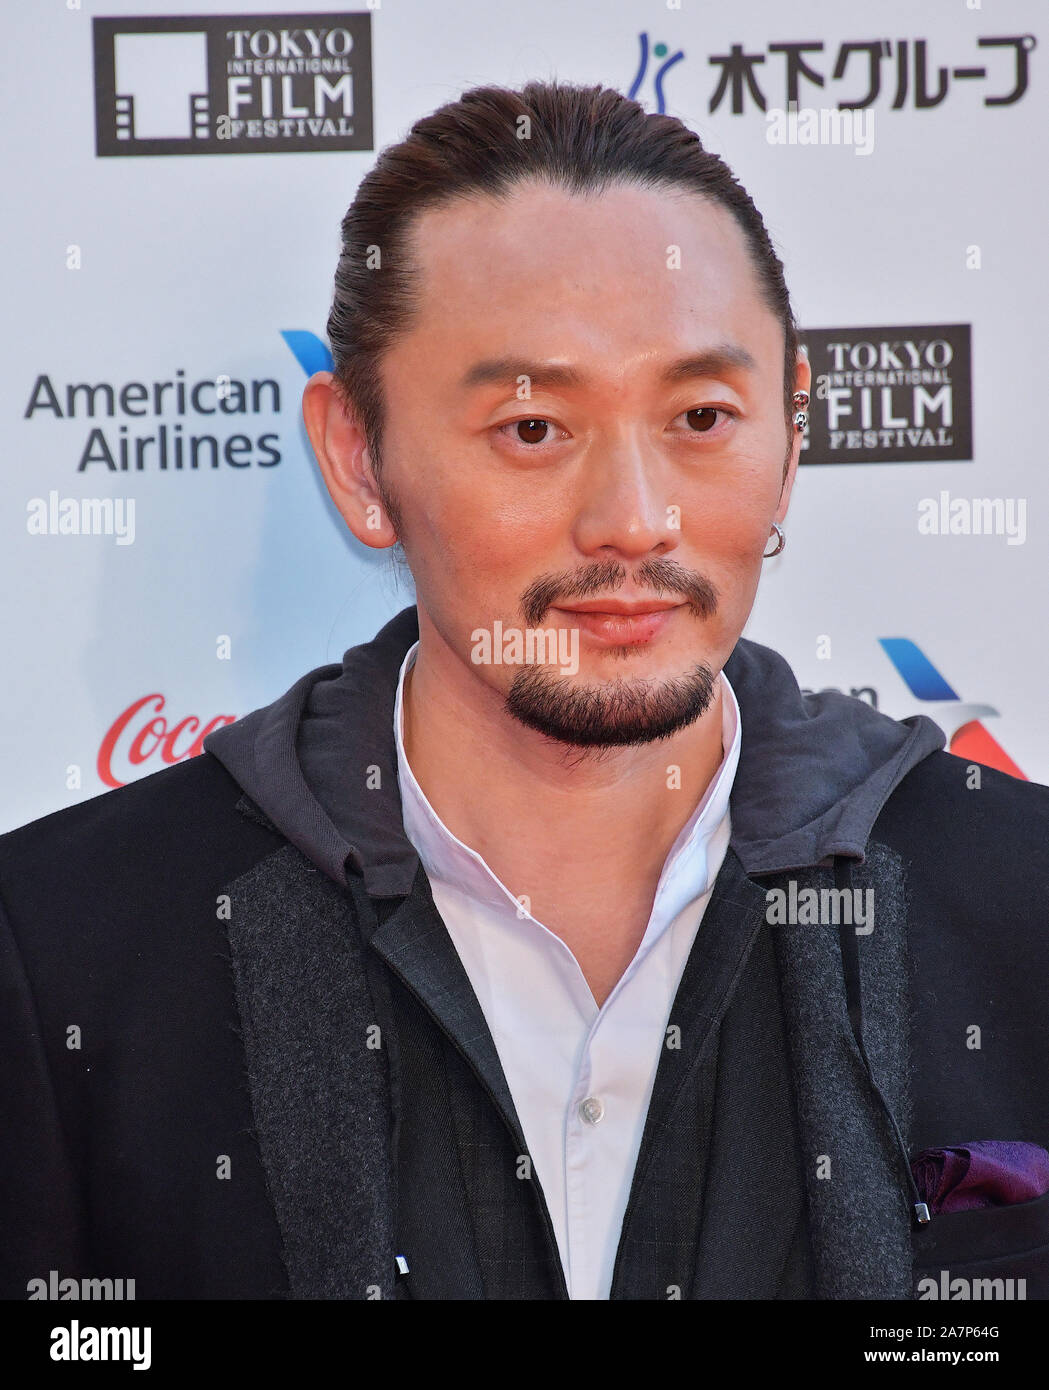 Producer Terence Chang attends the opening ceremony of Tokyo International Film Festival 2019 at Roppongi Hills on October 28, 2019 in Tokyo, Japan. Stock Photo